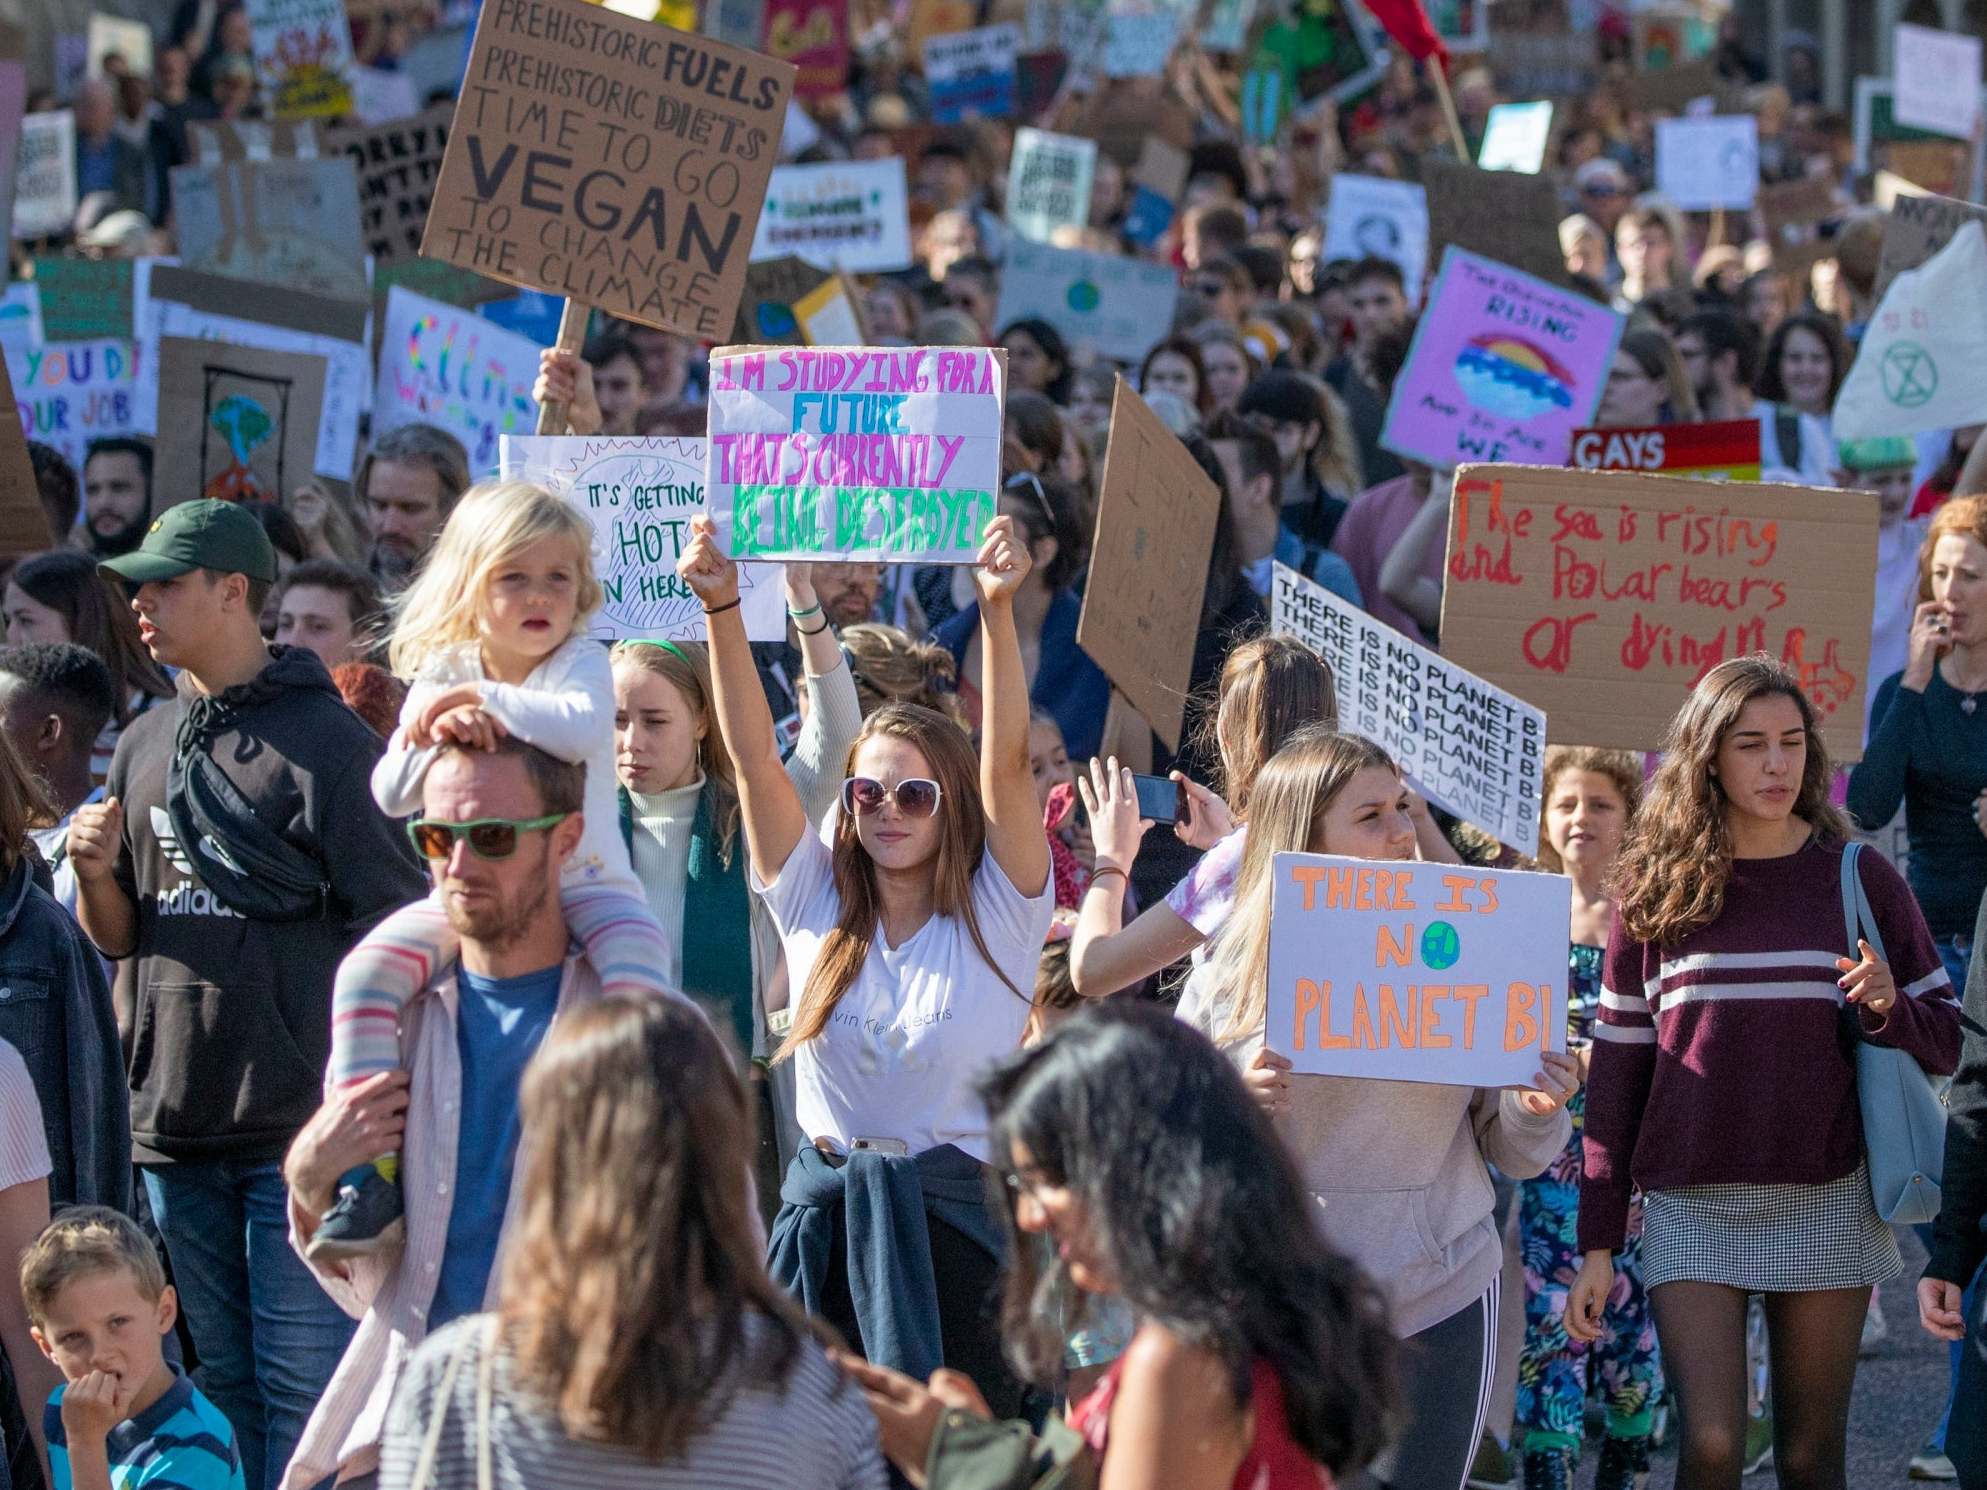 Hundreds of thousands of students across the world took part in the climate strikes last year